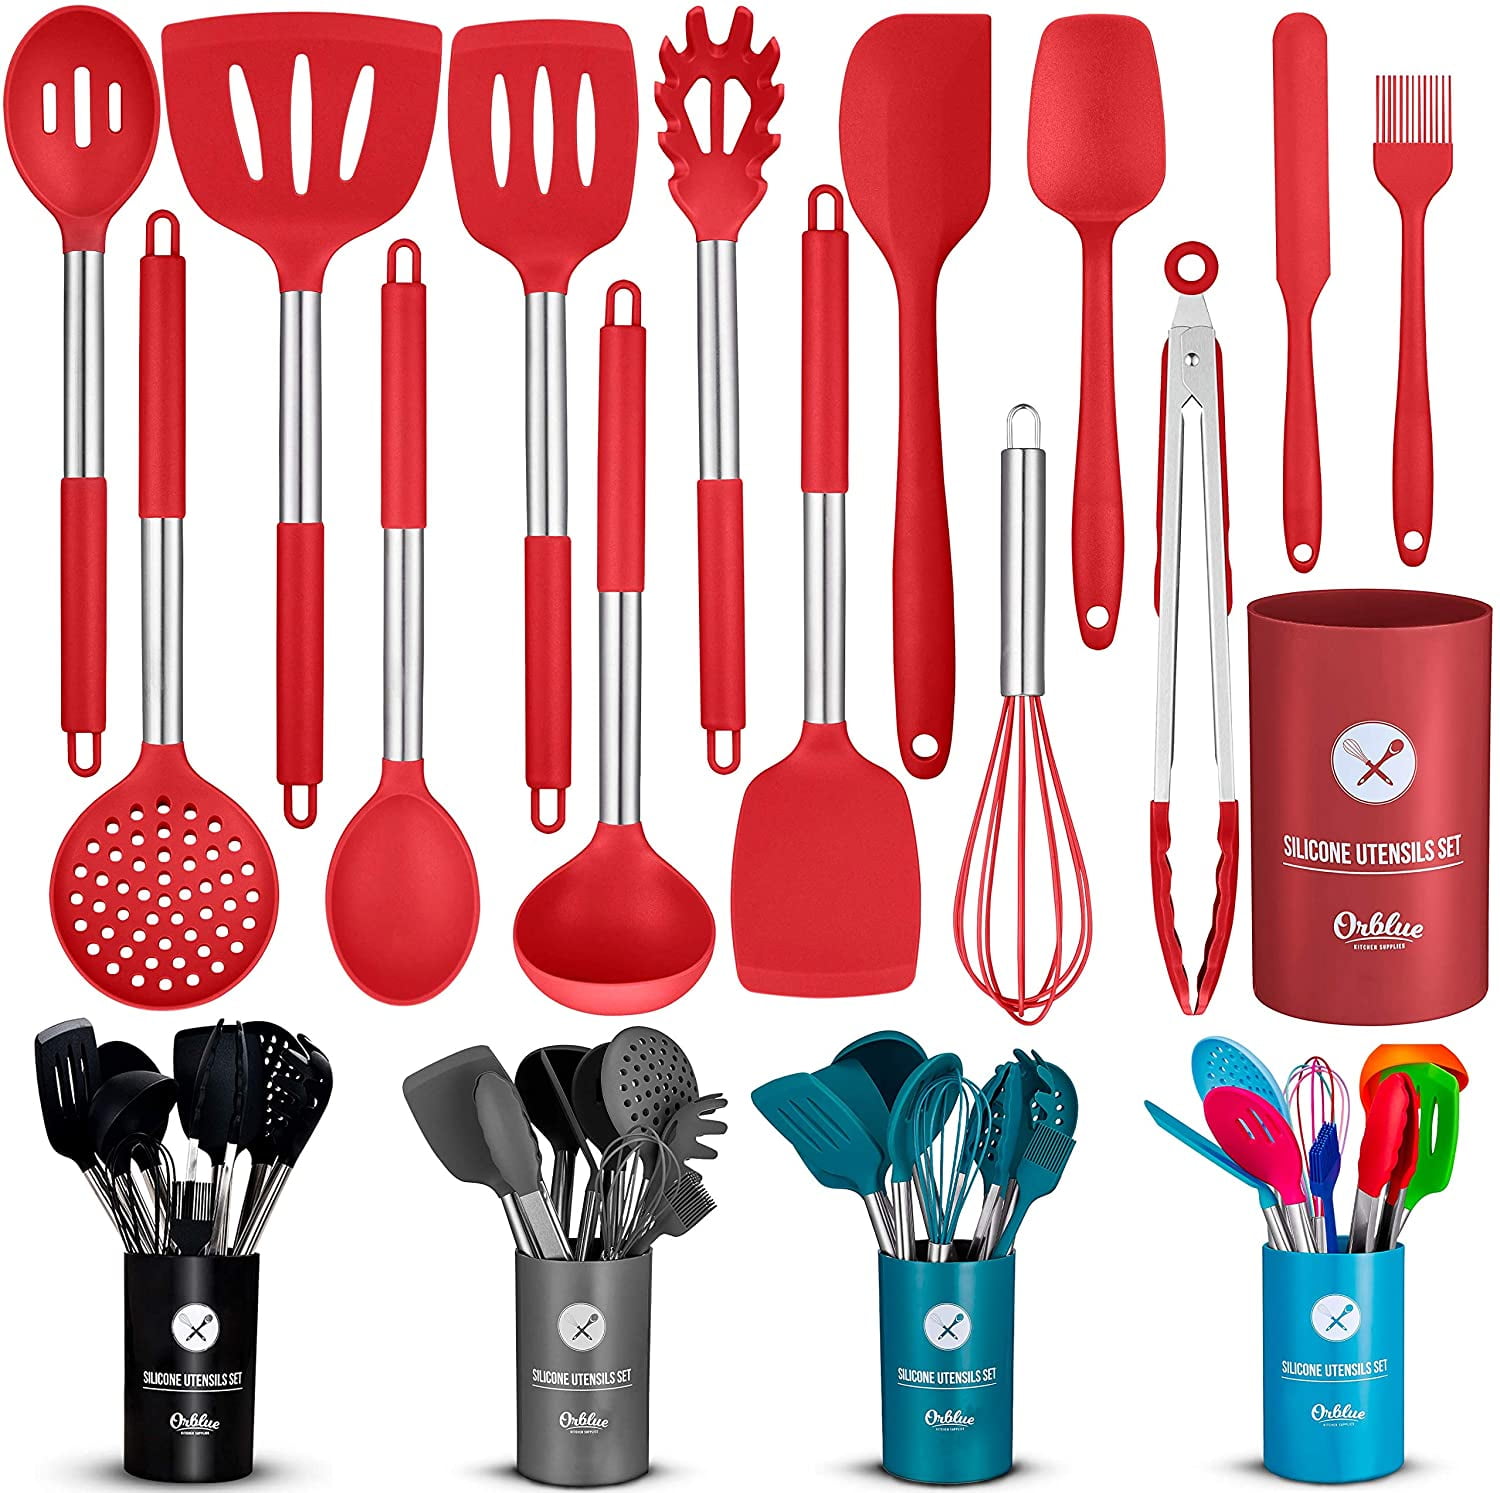 Silicone Cooking Utensils Set Food Grade Safety Silicone Utensil